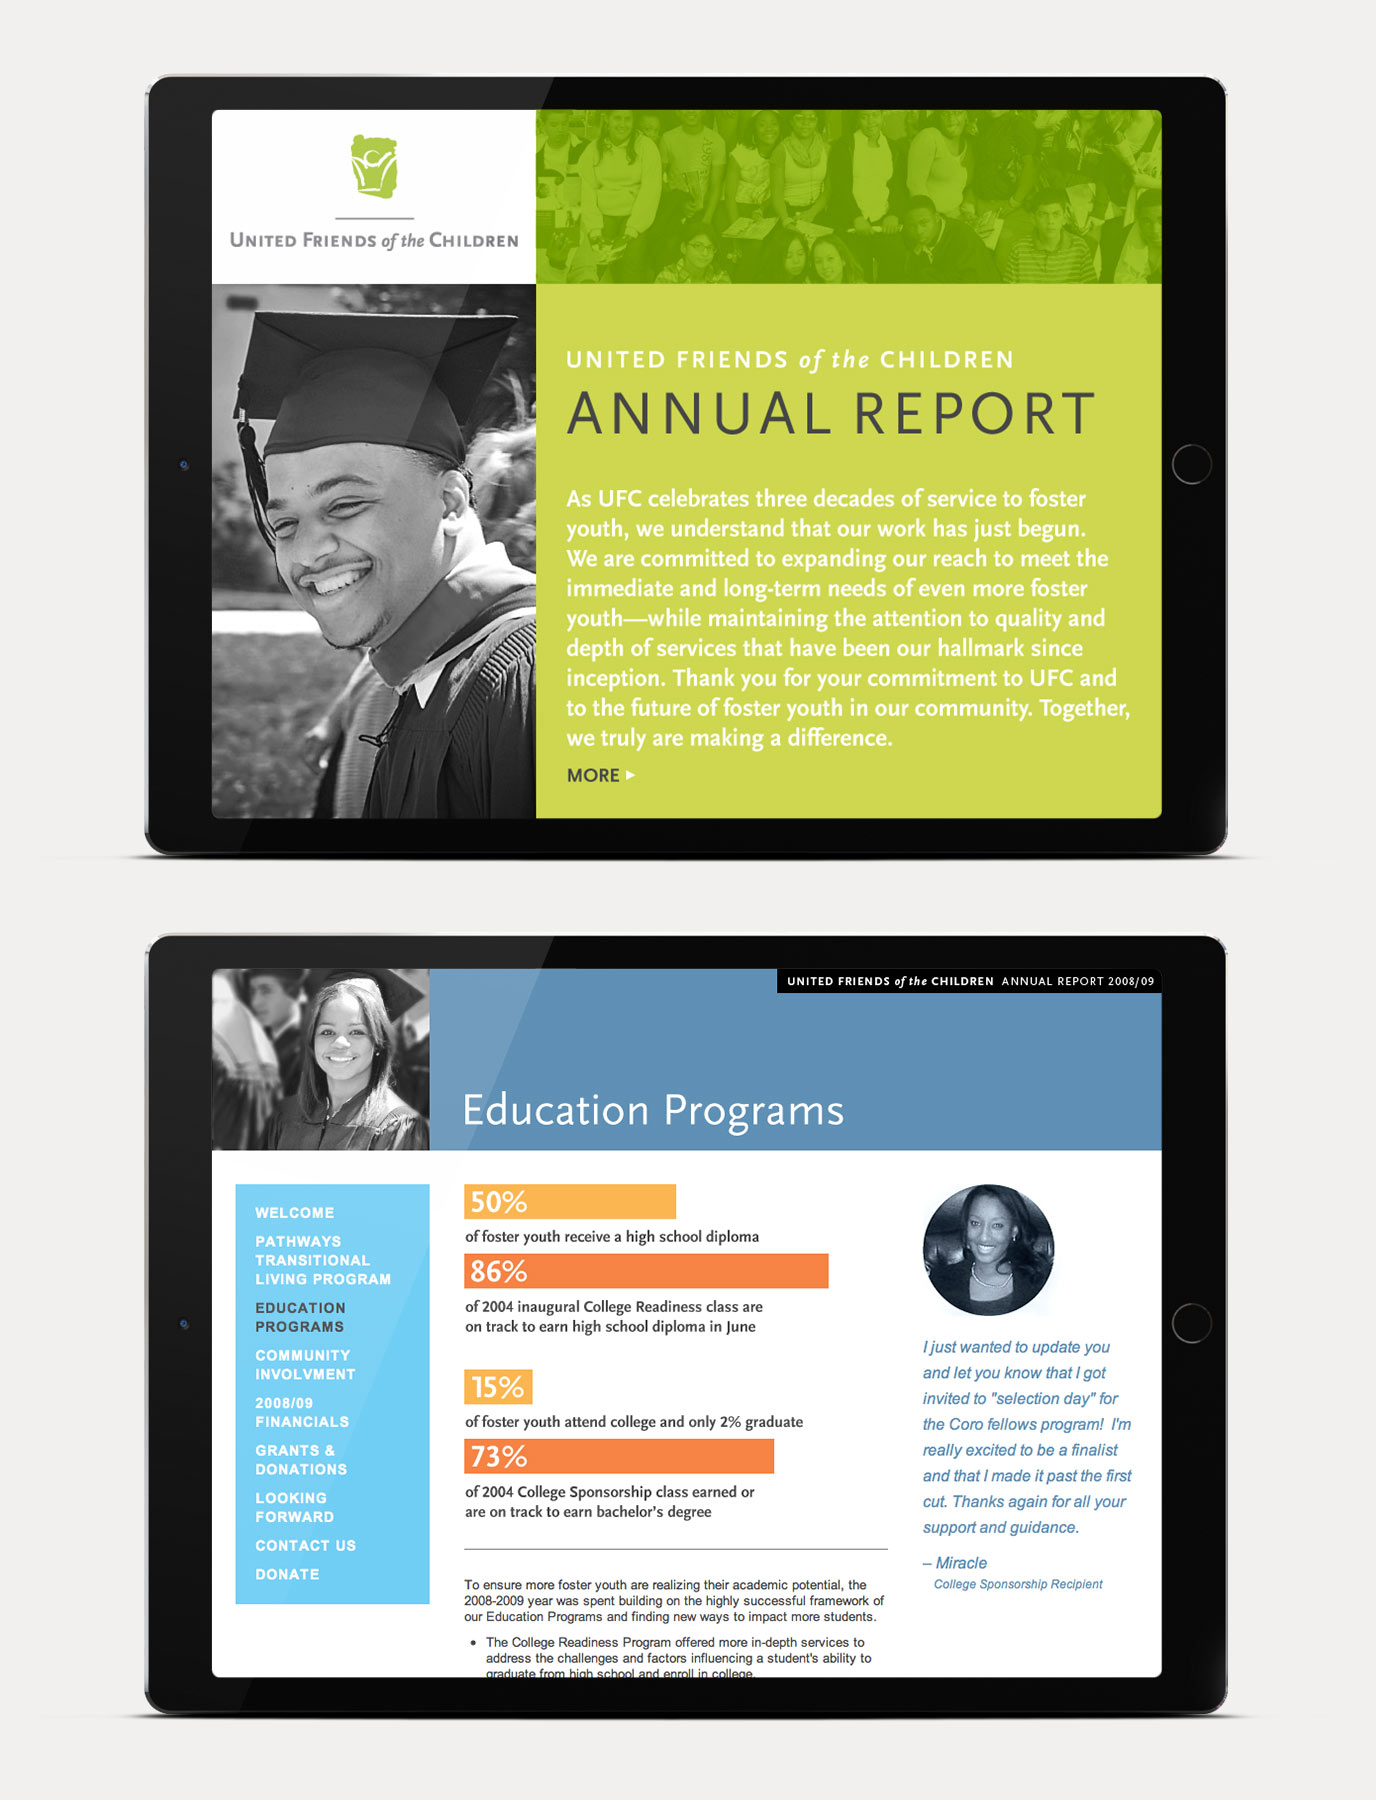 United Friends of the Children online annual reports